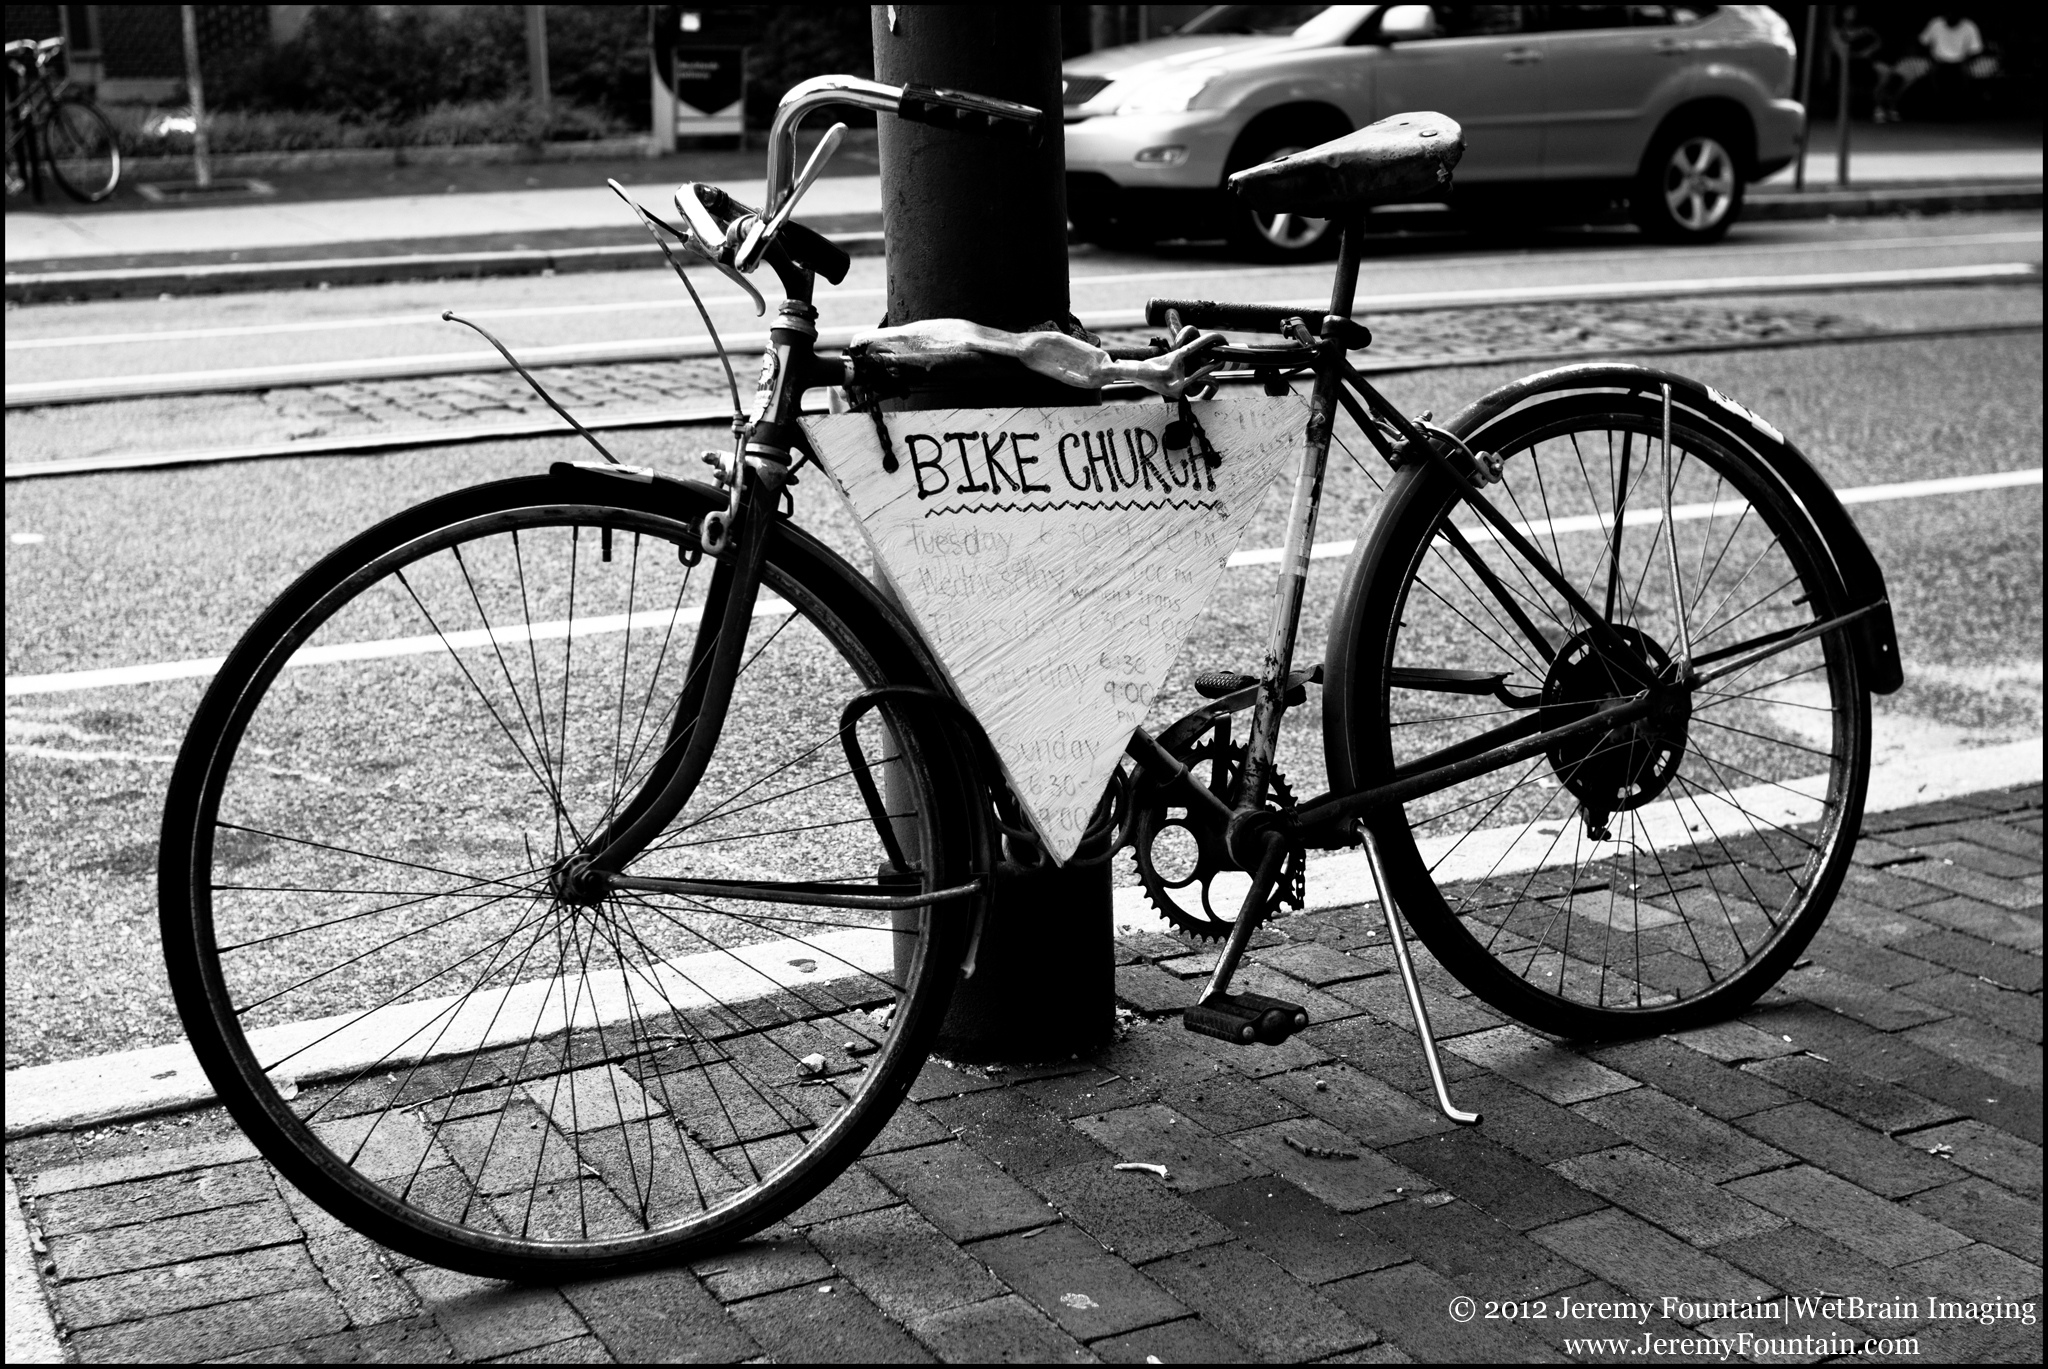 Bicycle, Photo by Jeremy Fountain